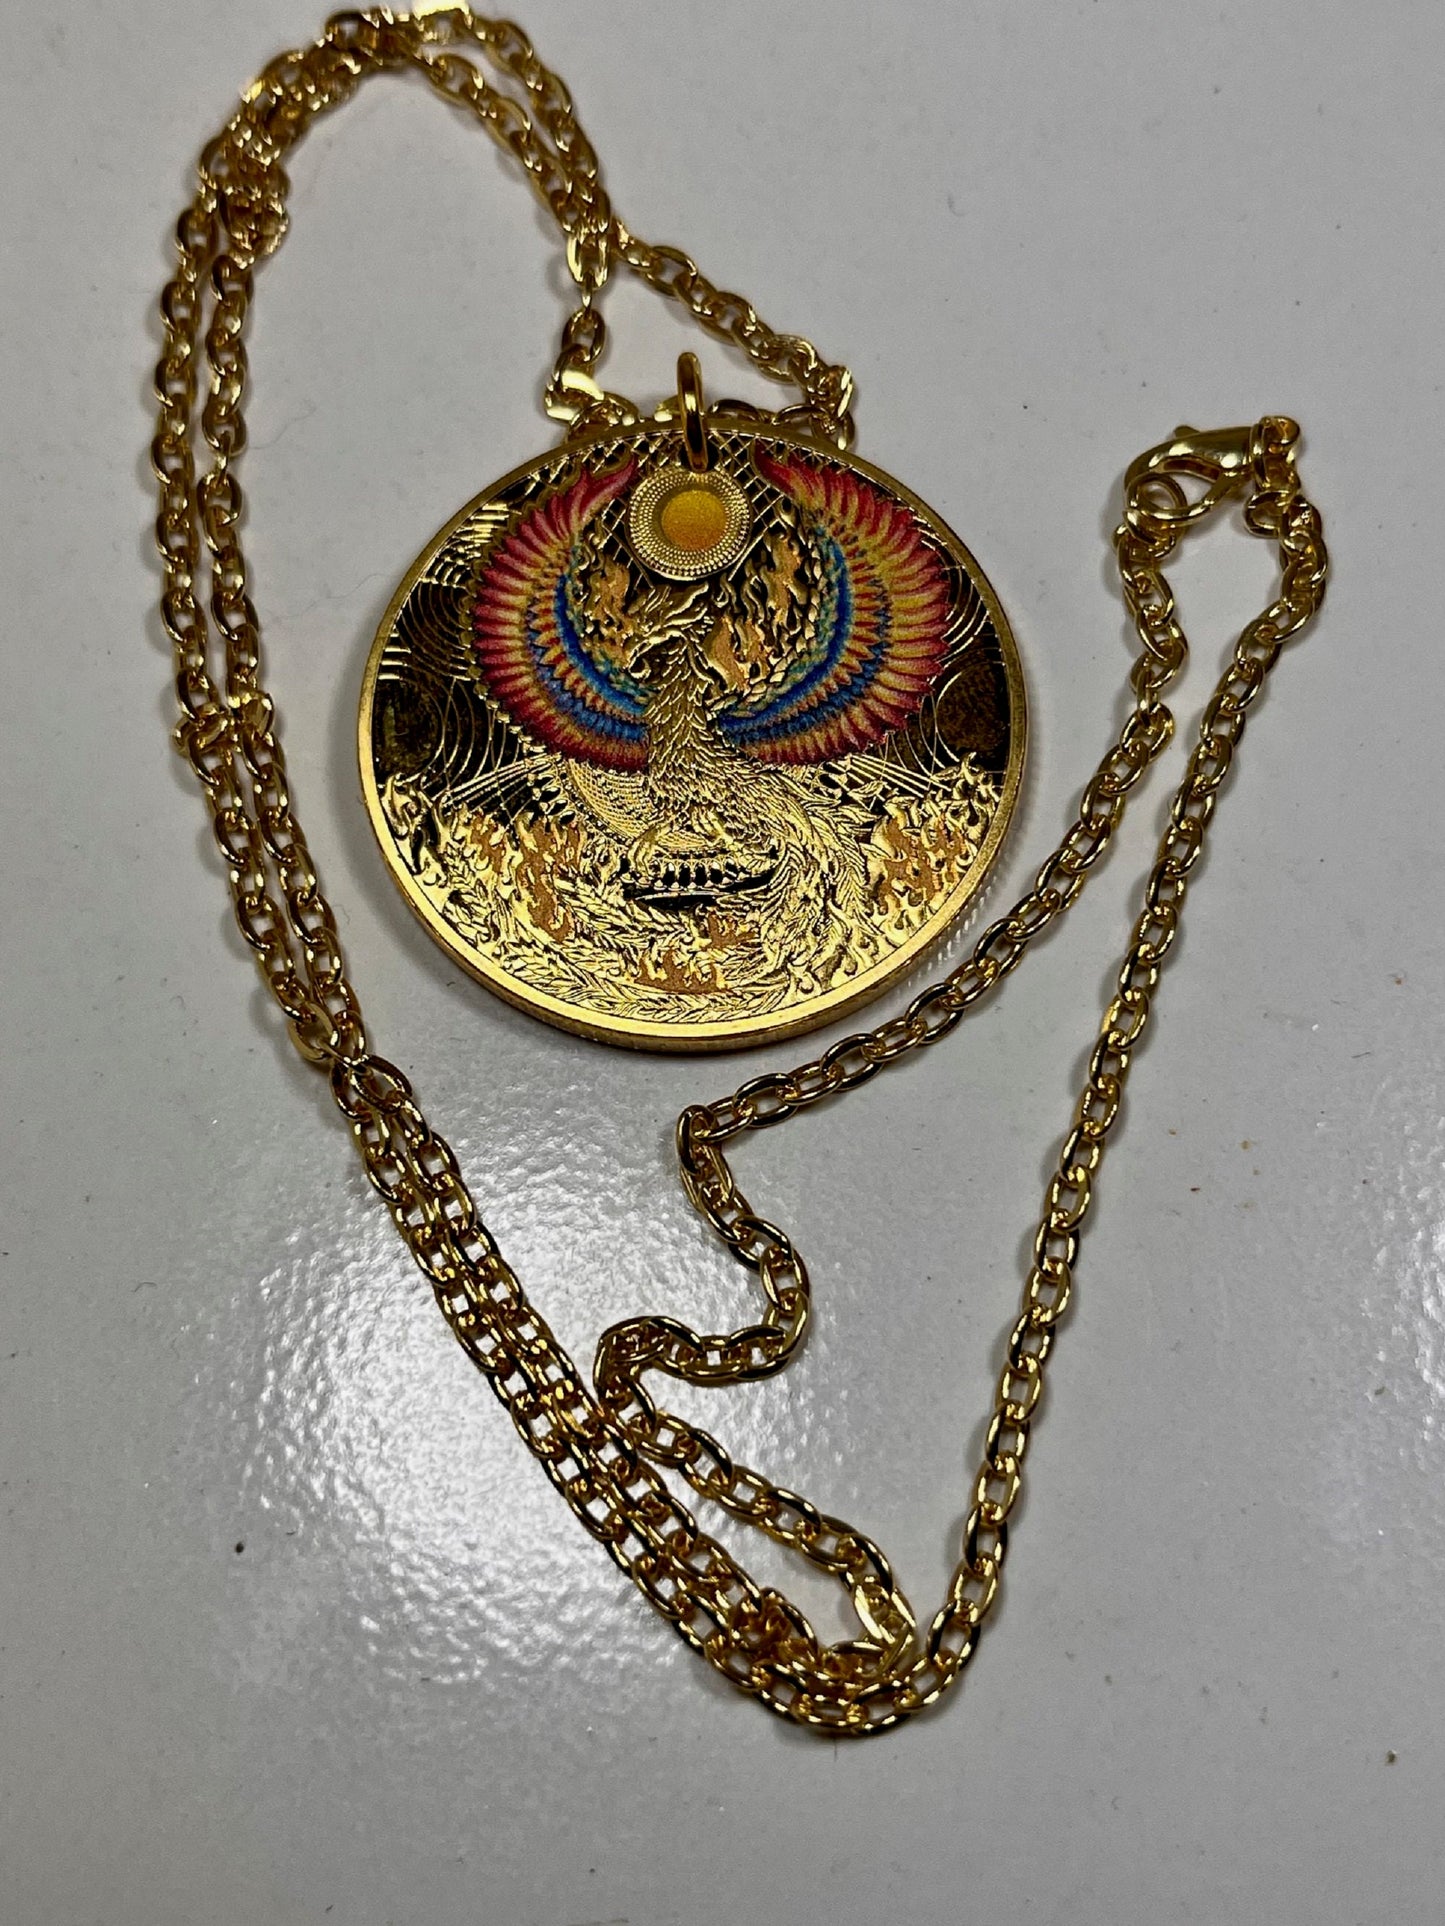 China Medallion Necklace Ancient Mythical Flaming Bird Medallion Rare Find Personal & Limited Supply